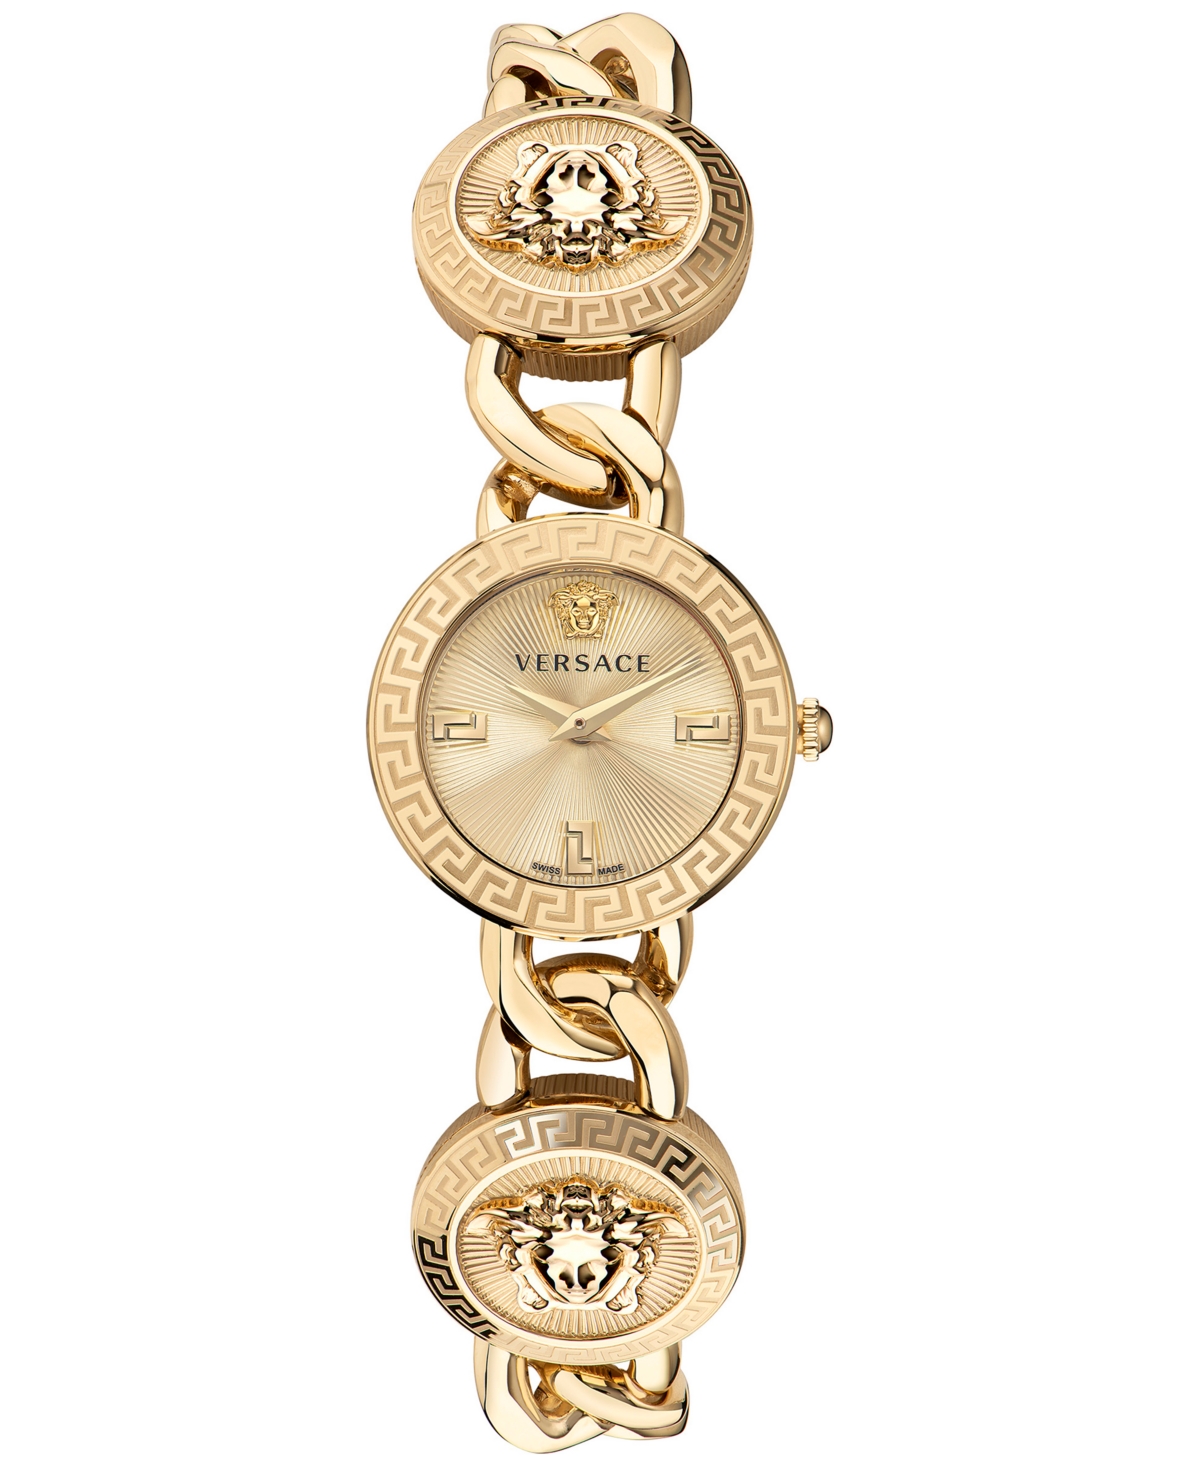 VERSACE WOMEN'S STUD ICON GOLD ION PLATED BRACELET WATCH 26MM